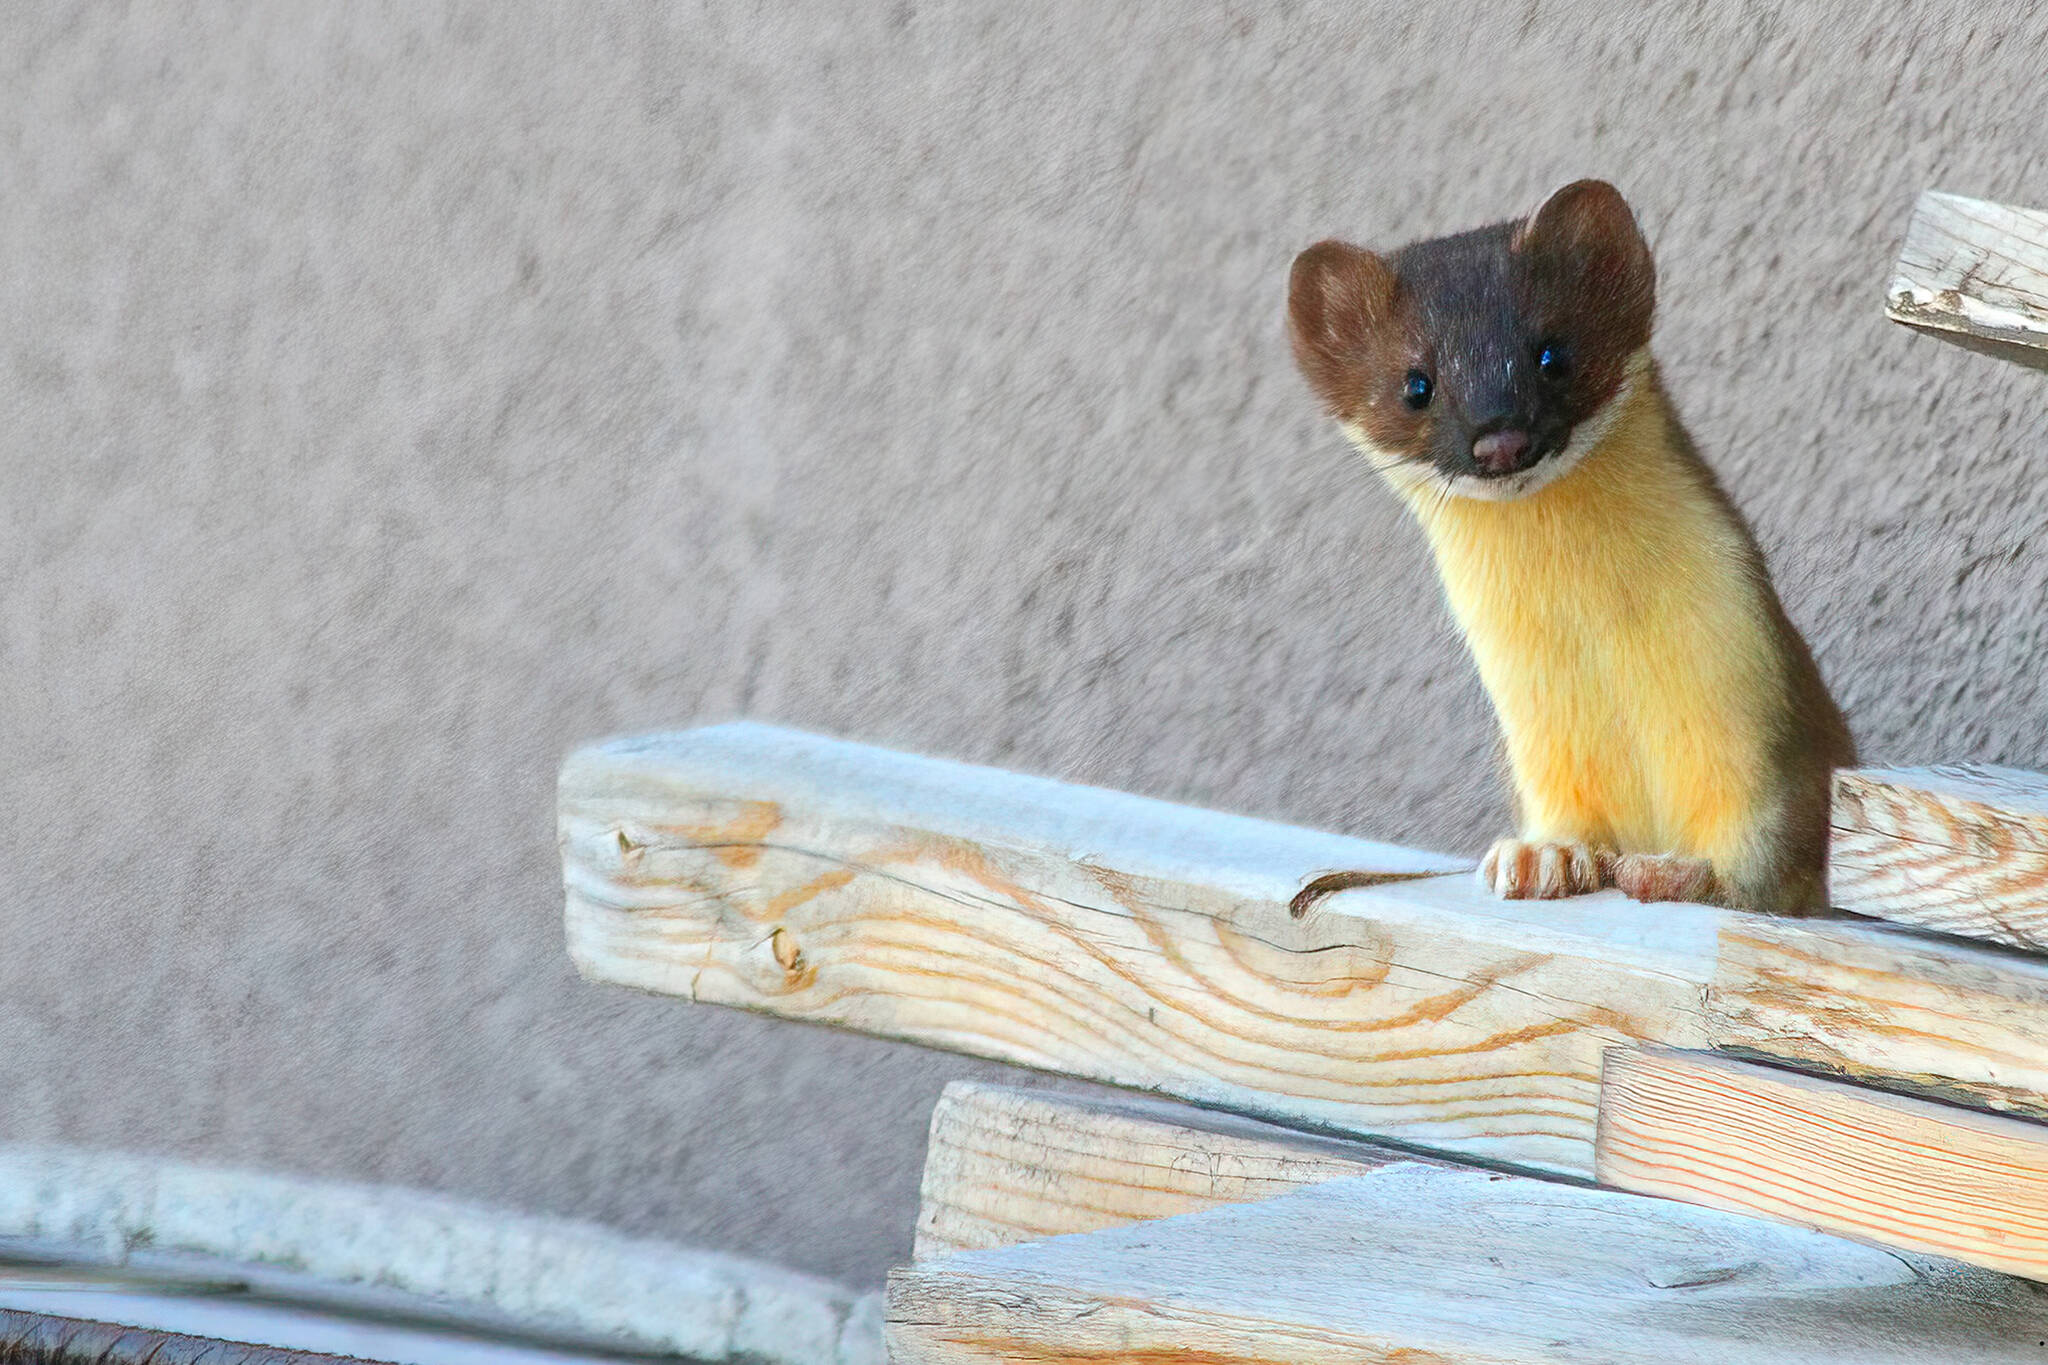 This July 13 photo shows a short-tailed weasel. Short-tailed weasels or ermines wear brown summer coats but white coats in winter. The animals are among the dozens of species that make up the family Mustelidae. The long, slender body form of weasels is well-suited for these predators to pursue voles and mice into narrow tunnels and tight spaces. (Courtesy Photo / Kerry Howard)